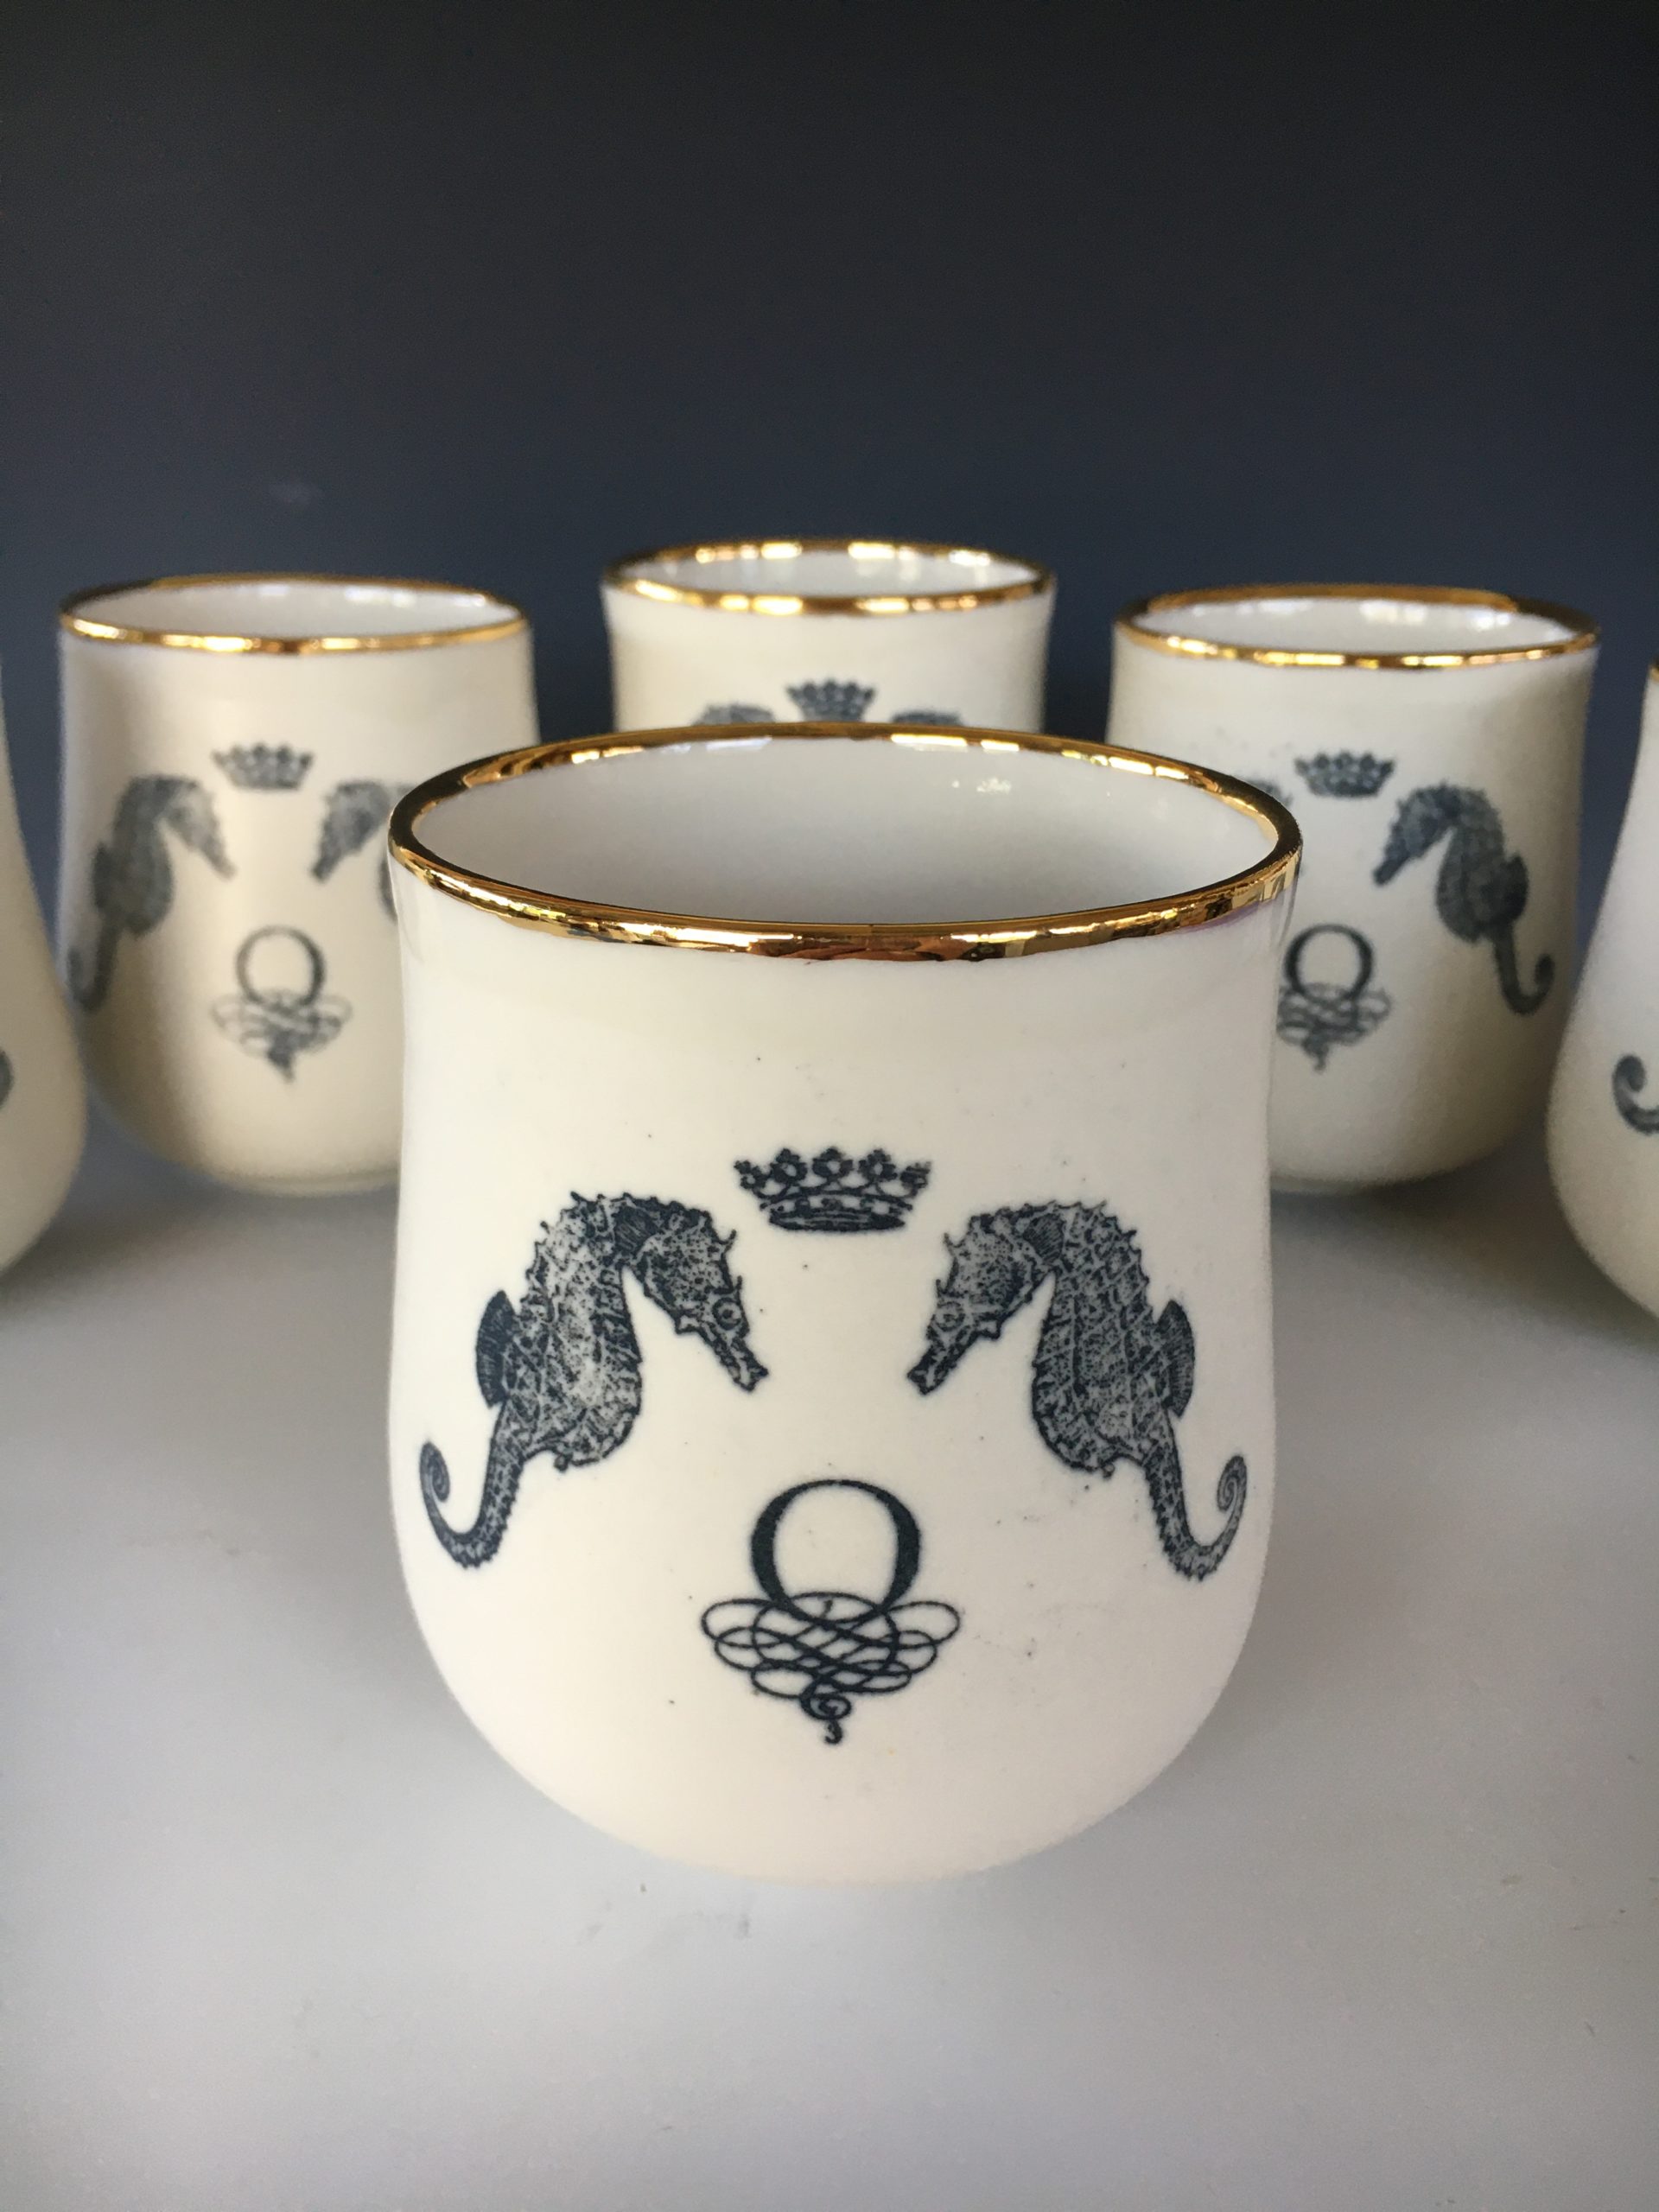 white wine glass goblets with seahorses and Oceano logo painted on